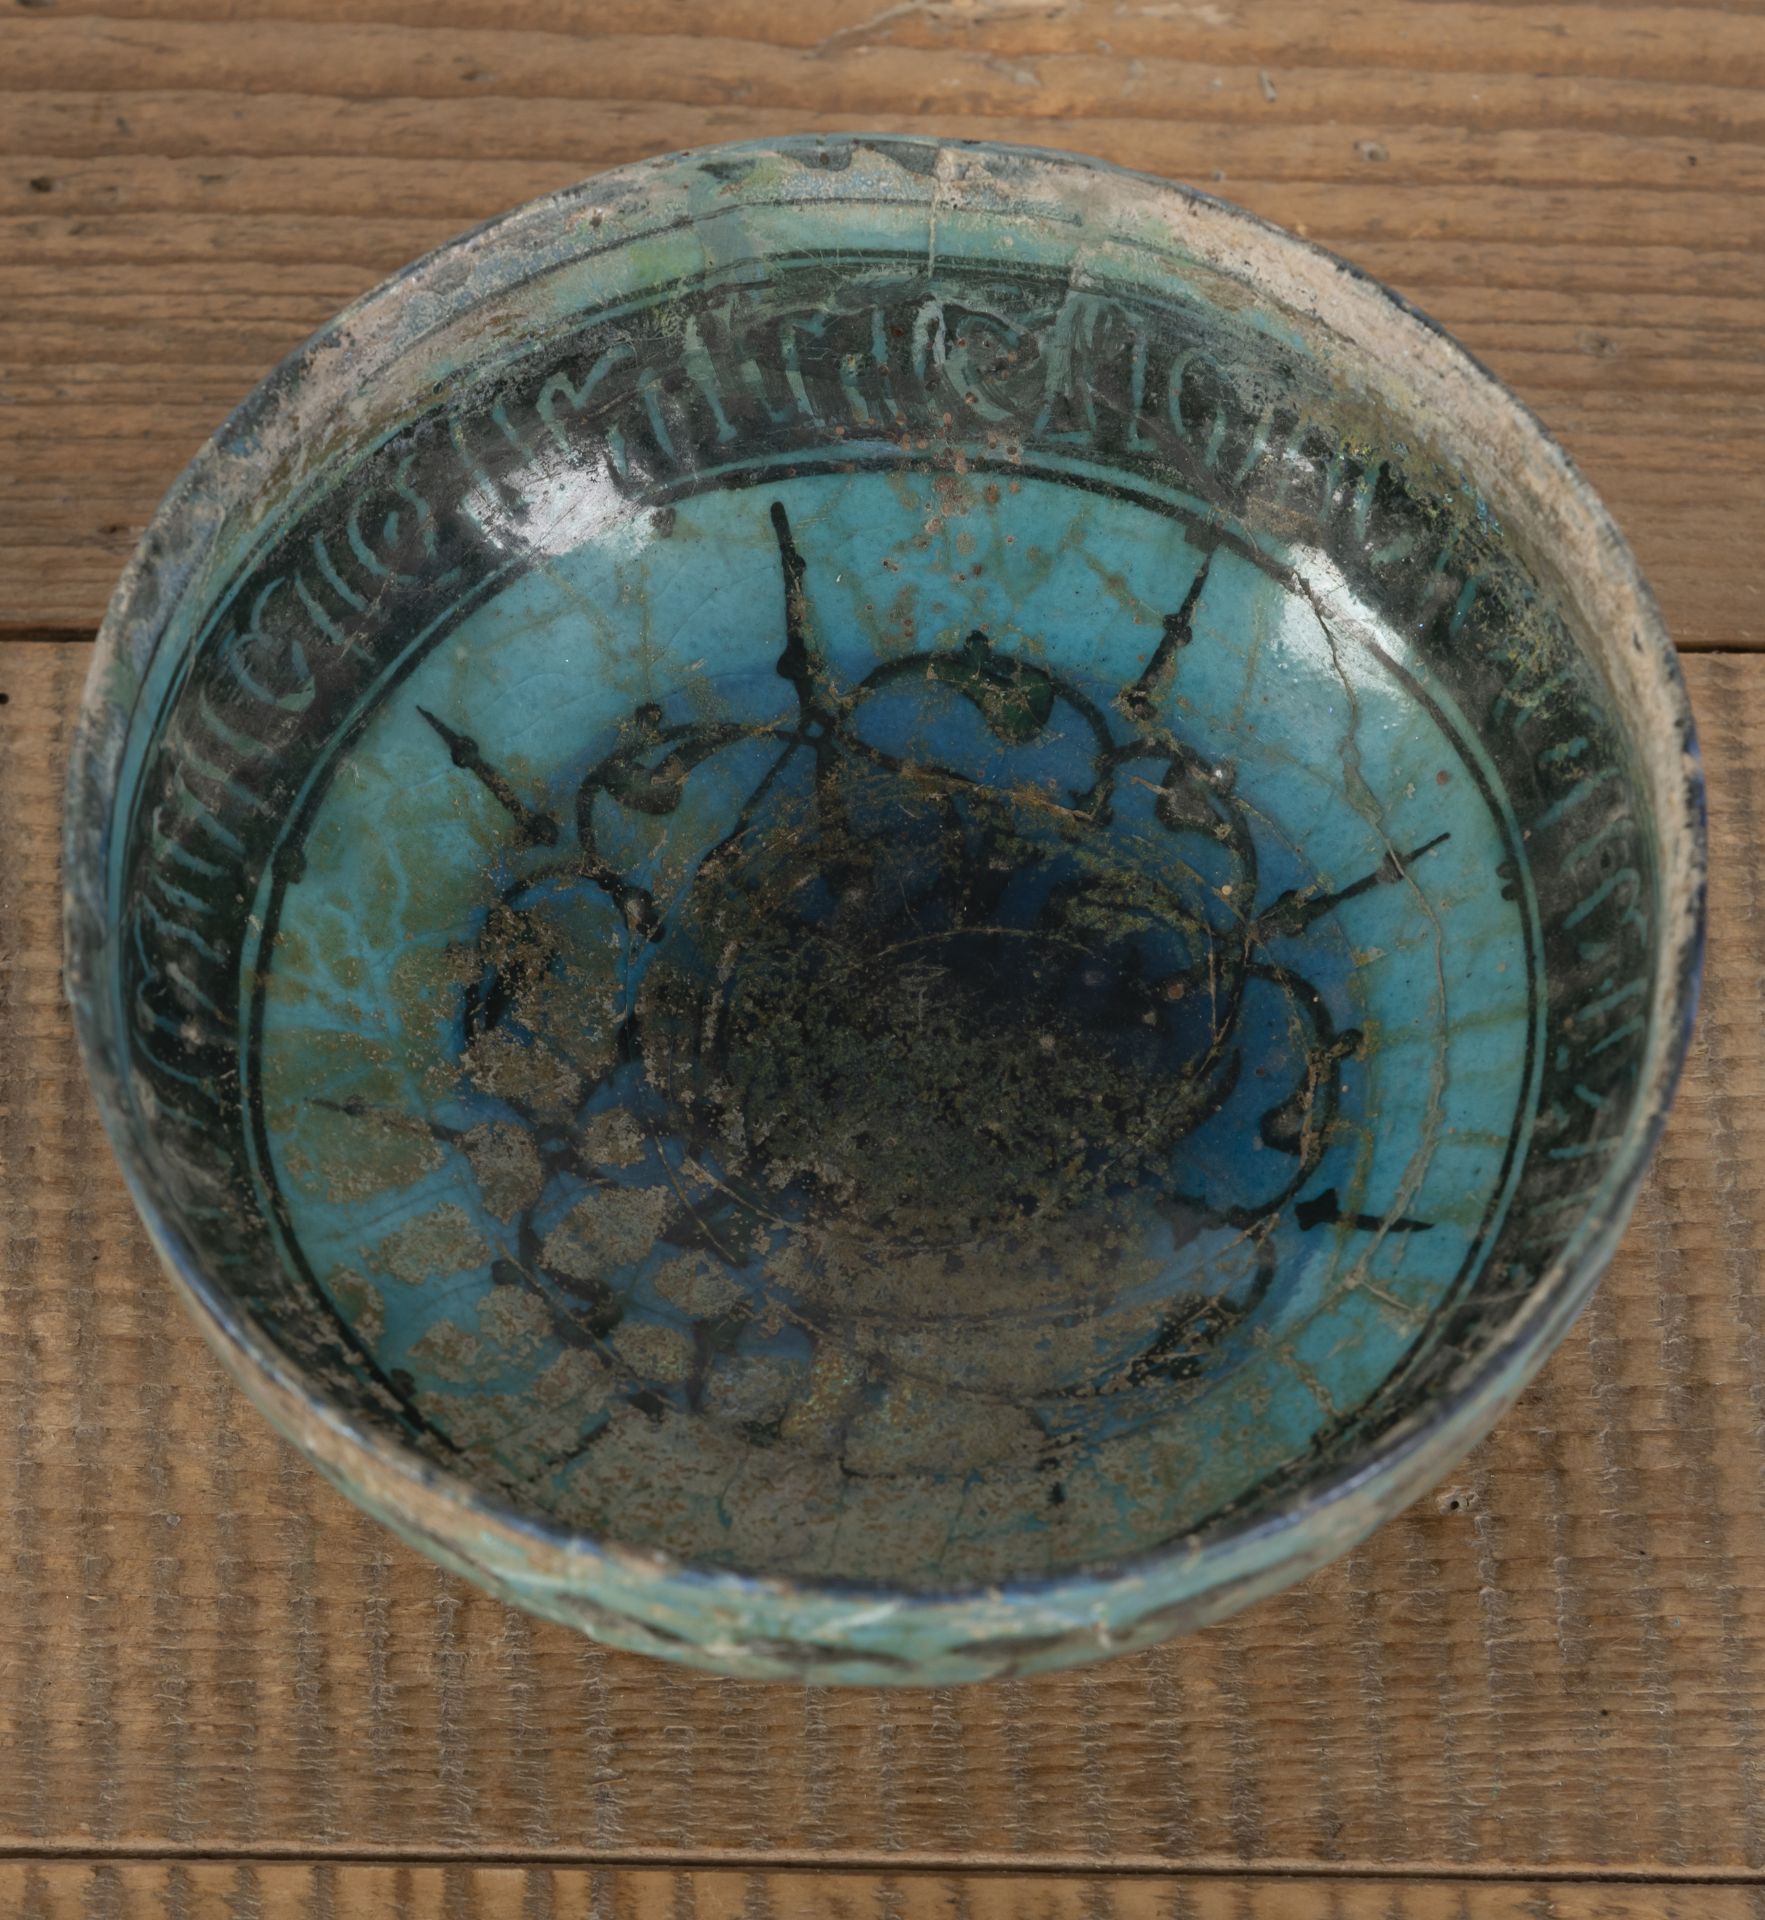 A PETROL-GLAZED CERAMIC BOWL WITH ABSTRACT DECORATION AND INSCRIPTION - Image 2 of 4